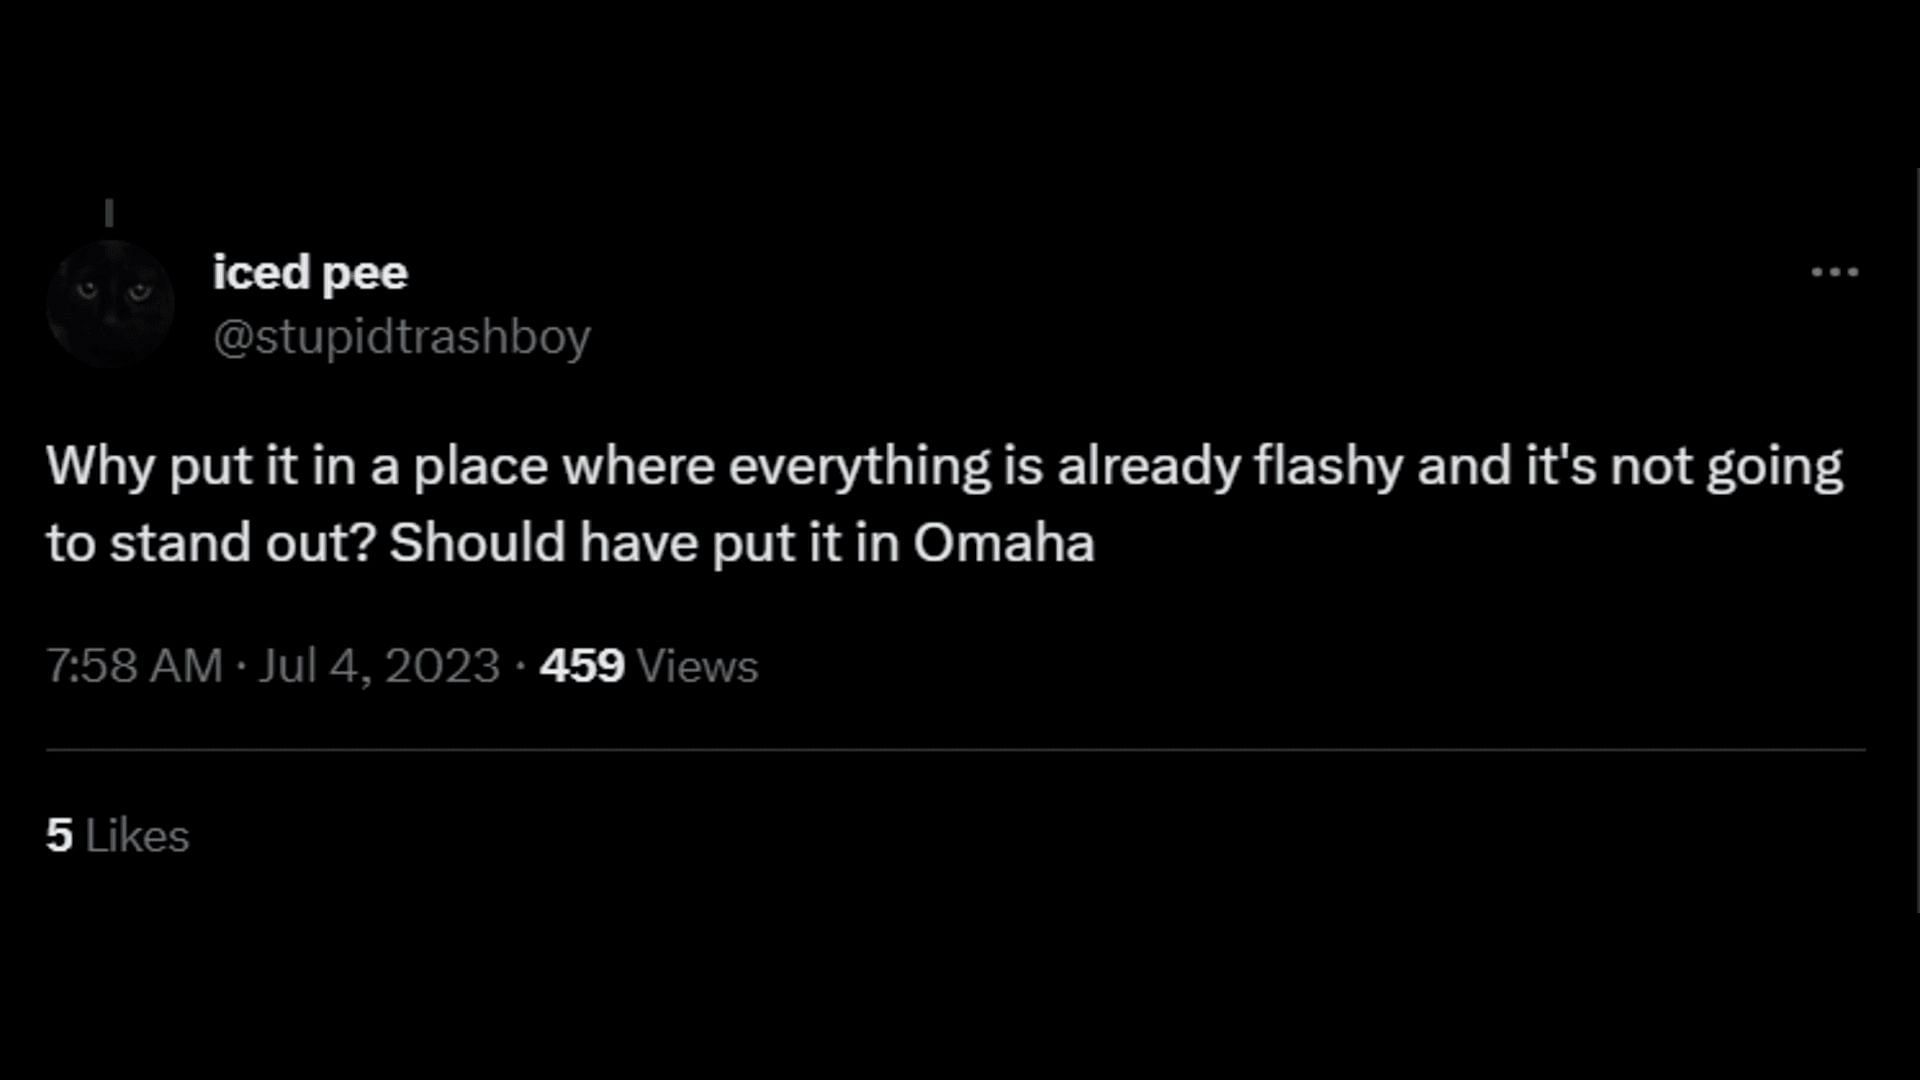 A tweet suggesting Omaha as an alternative location for the structure. (Image via Twitter/iced pee)